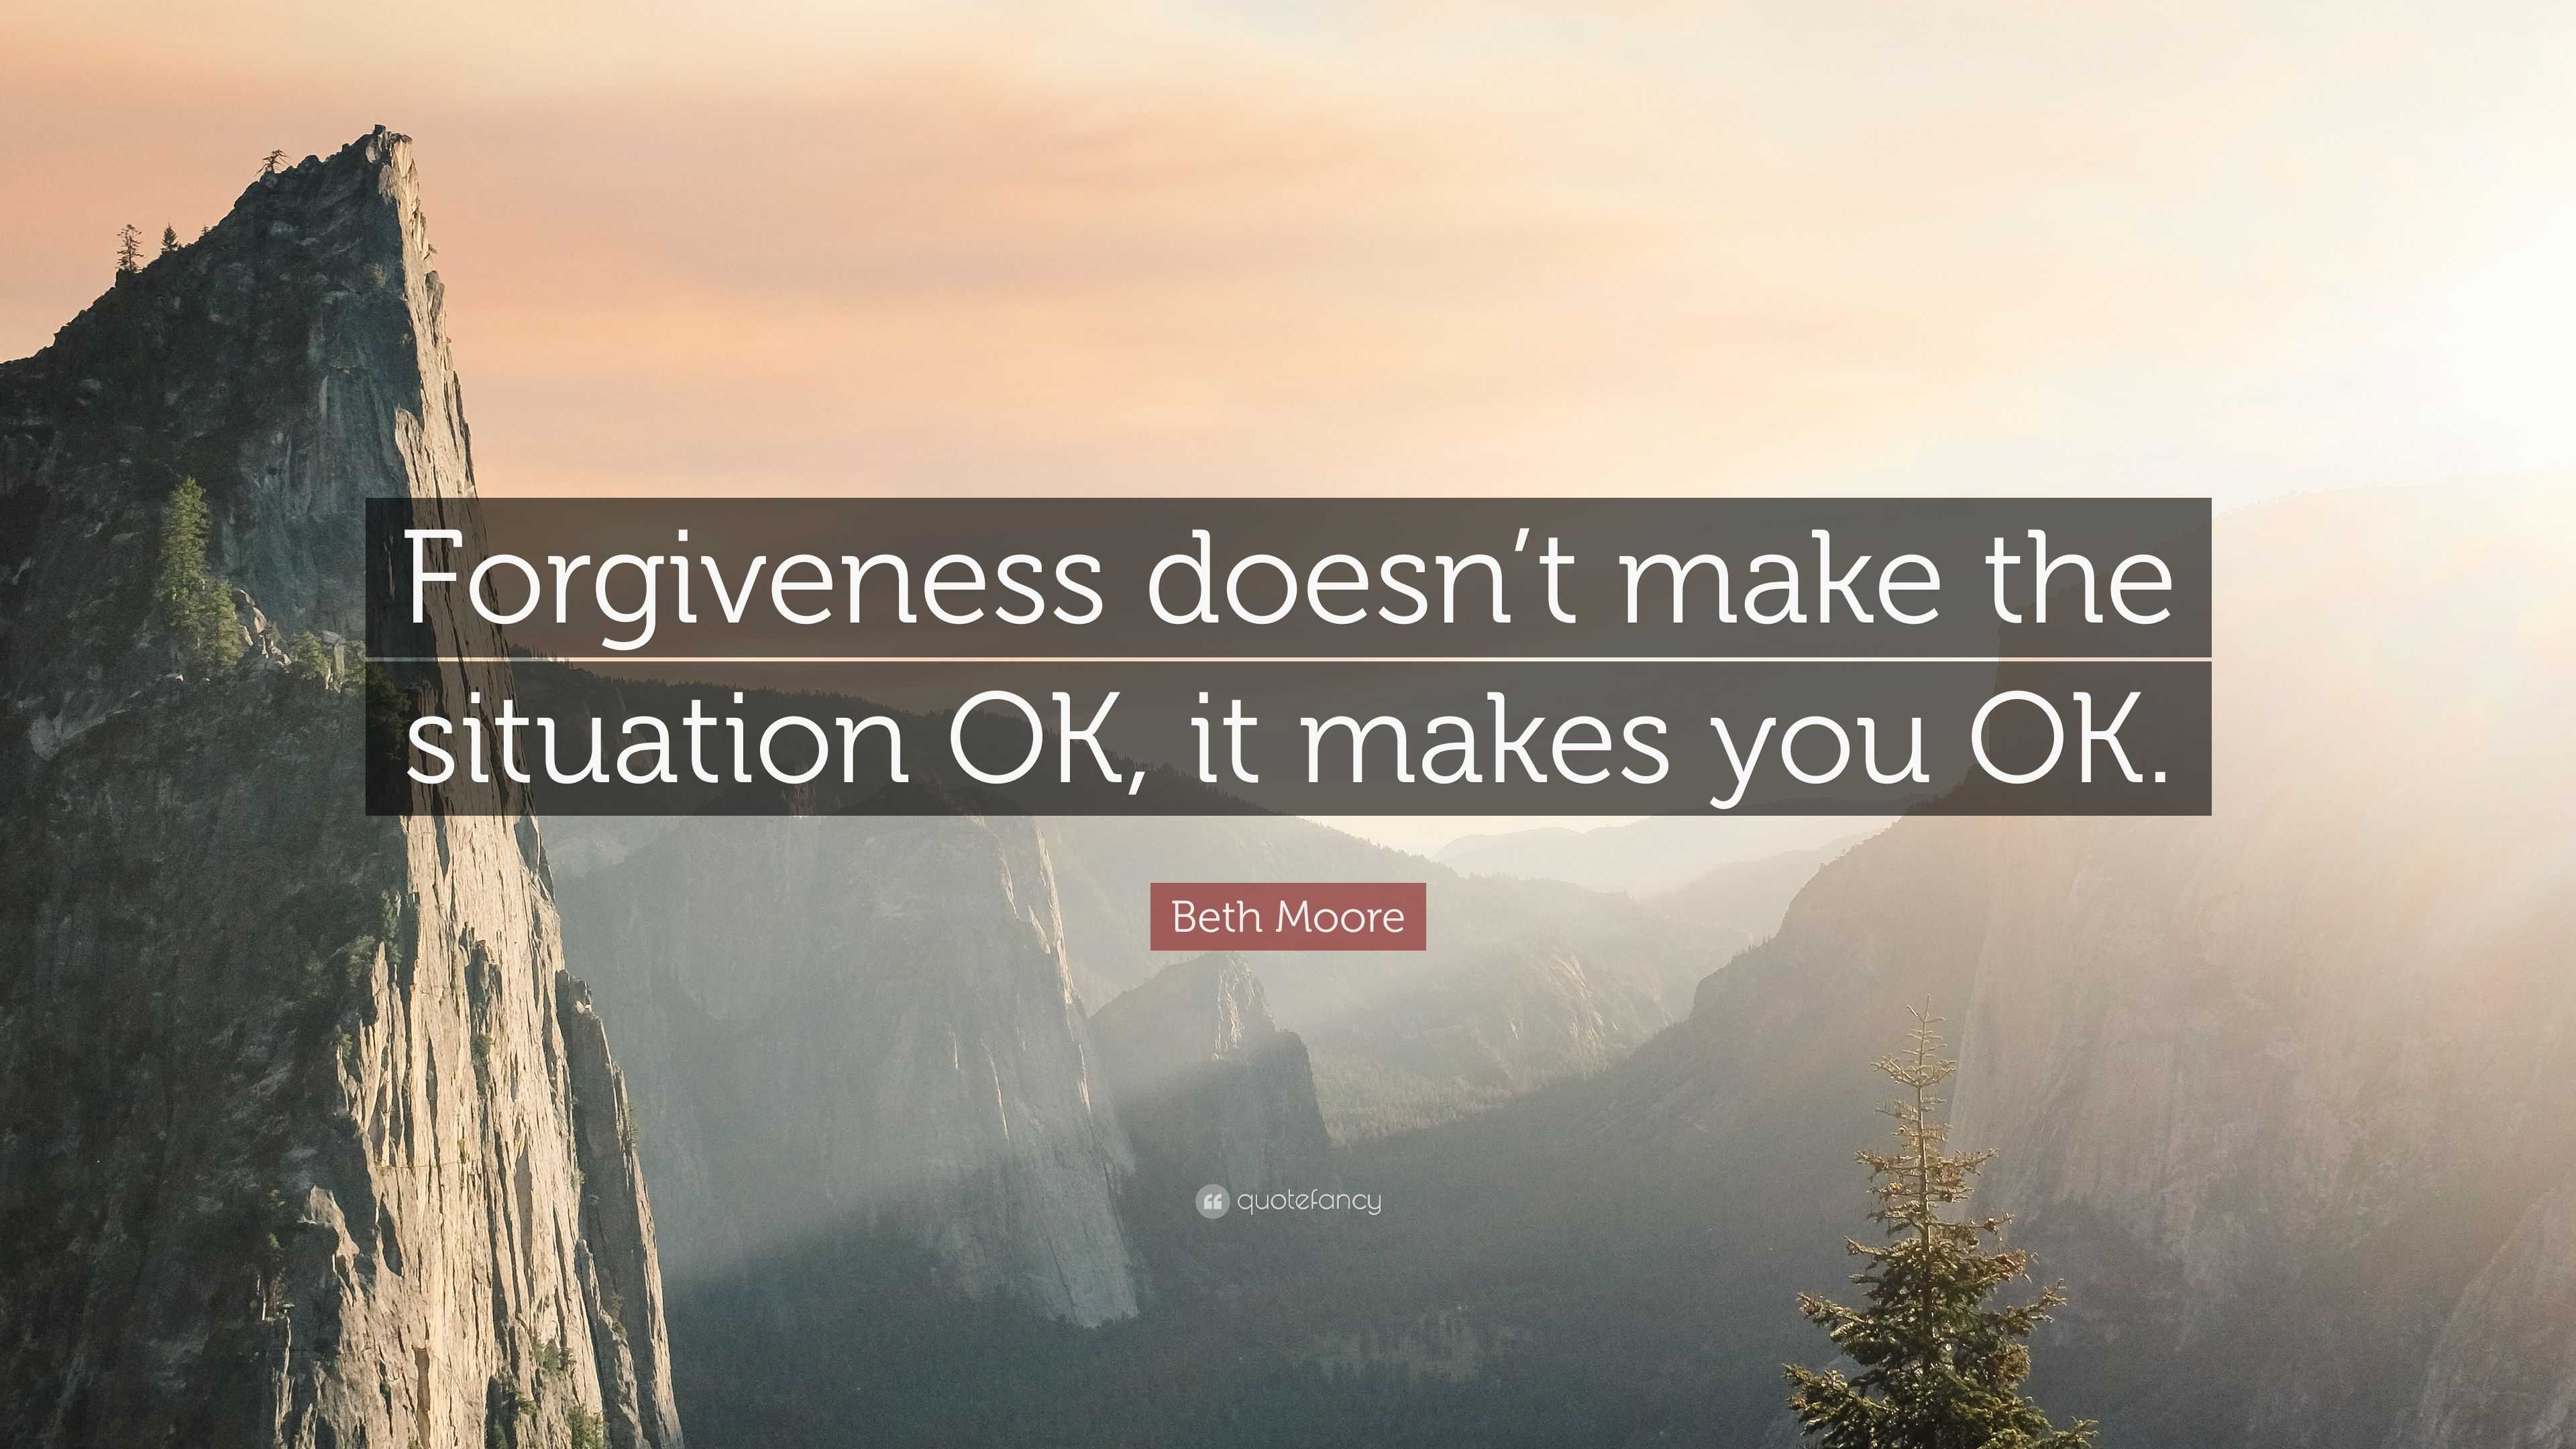 Beth Moore Quote: “Forgiveness doesn’t make the situation OK, it makes ...